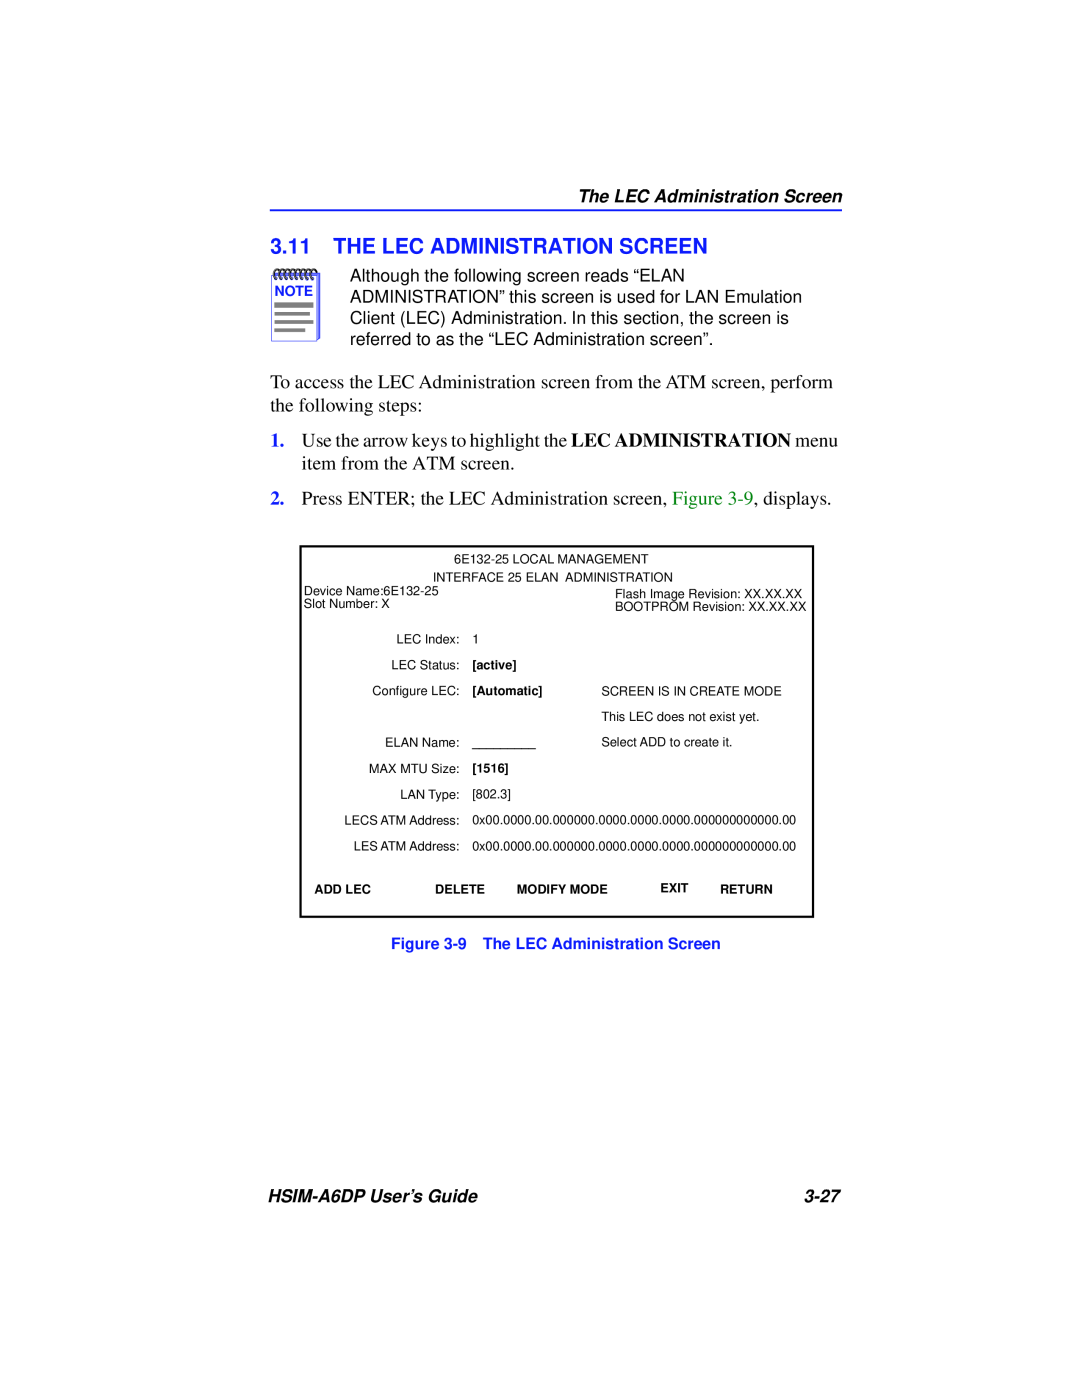 Cabletron Systems HSIM-A6DP manual The Lec Administration Screen 